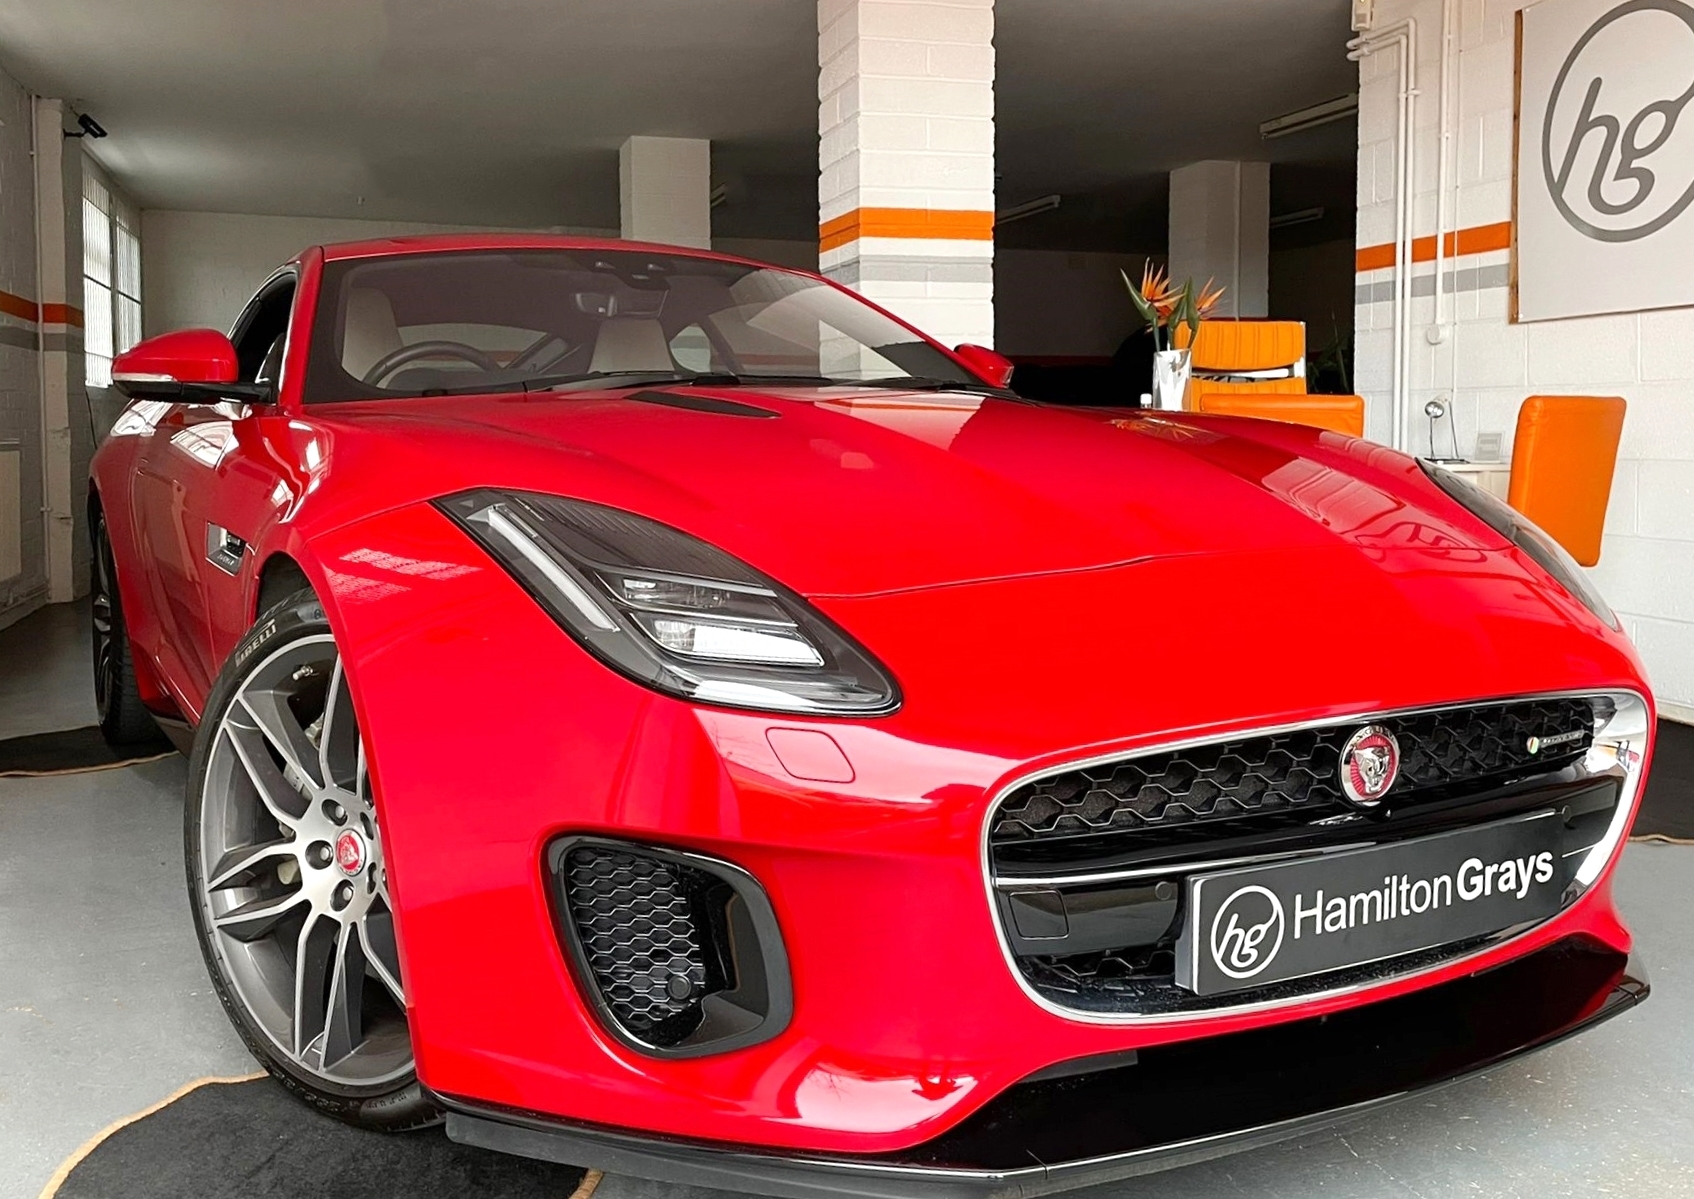 2020 (69) Jaguar F Type 2.0i [300] R-Dynamic Auto. In Solid Caldera Red with Full Ivory Leather. FSH.. 16k. Serviced and MOT by Jaguar 03.01.23 Sports Exhaust System.. A Striking Car.  £36,950